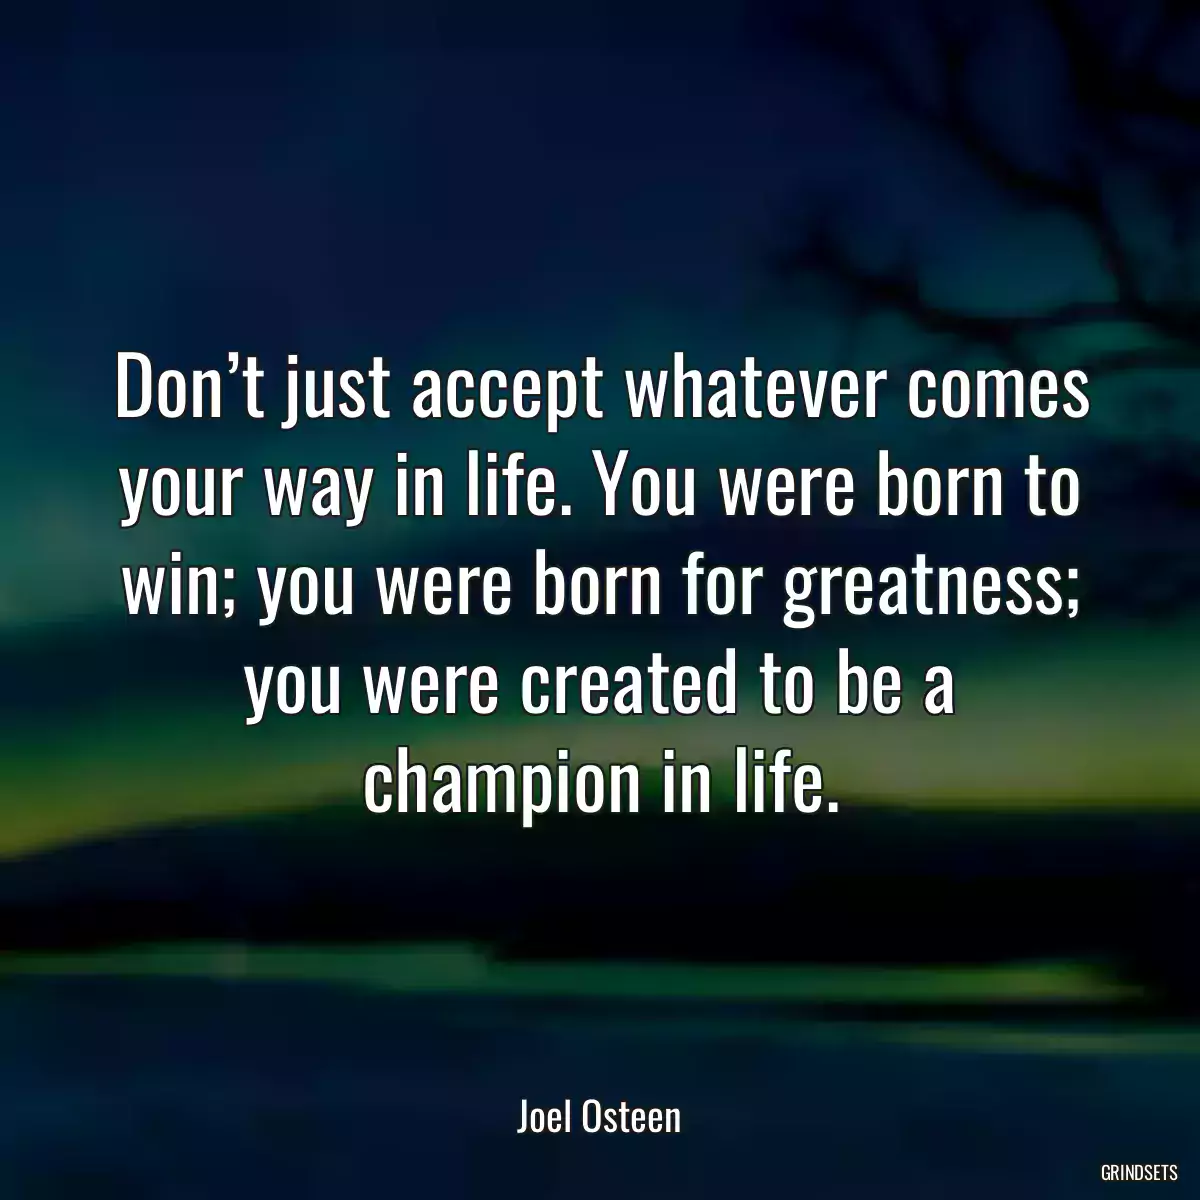 Don’t just accept whatever comes your way in life. You were born to win; you were born for greatness; you were created to be a champion in life.